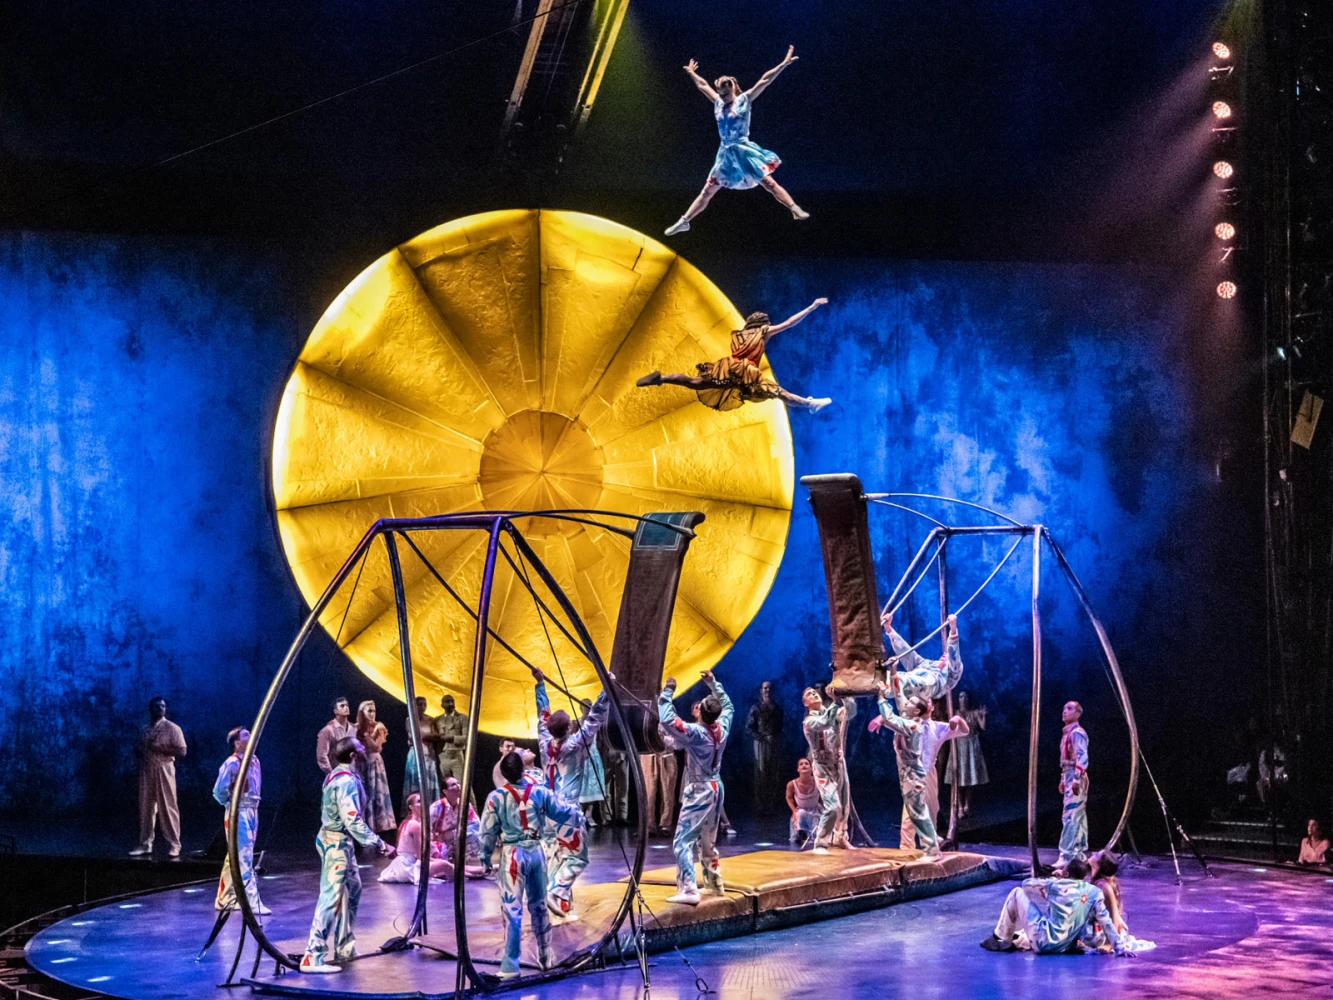 LUZIA: What to expect - 2